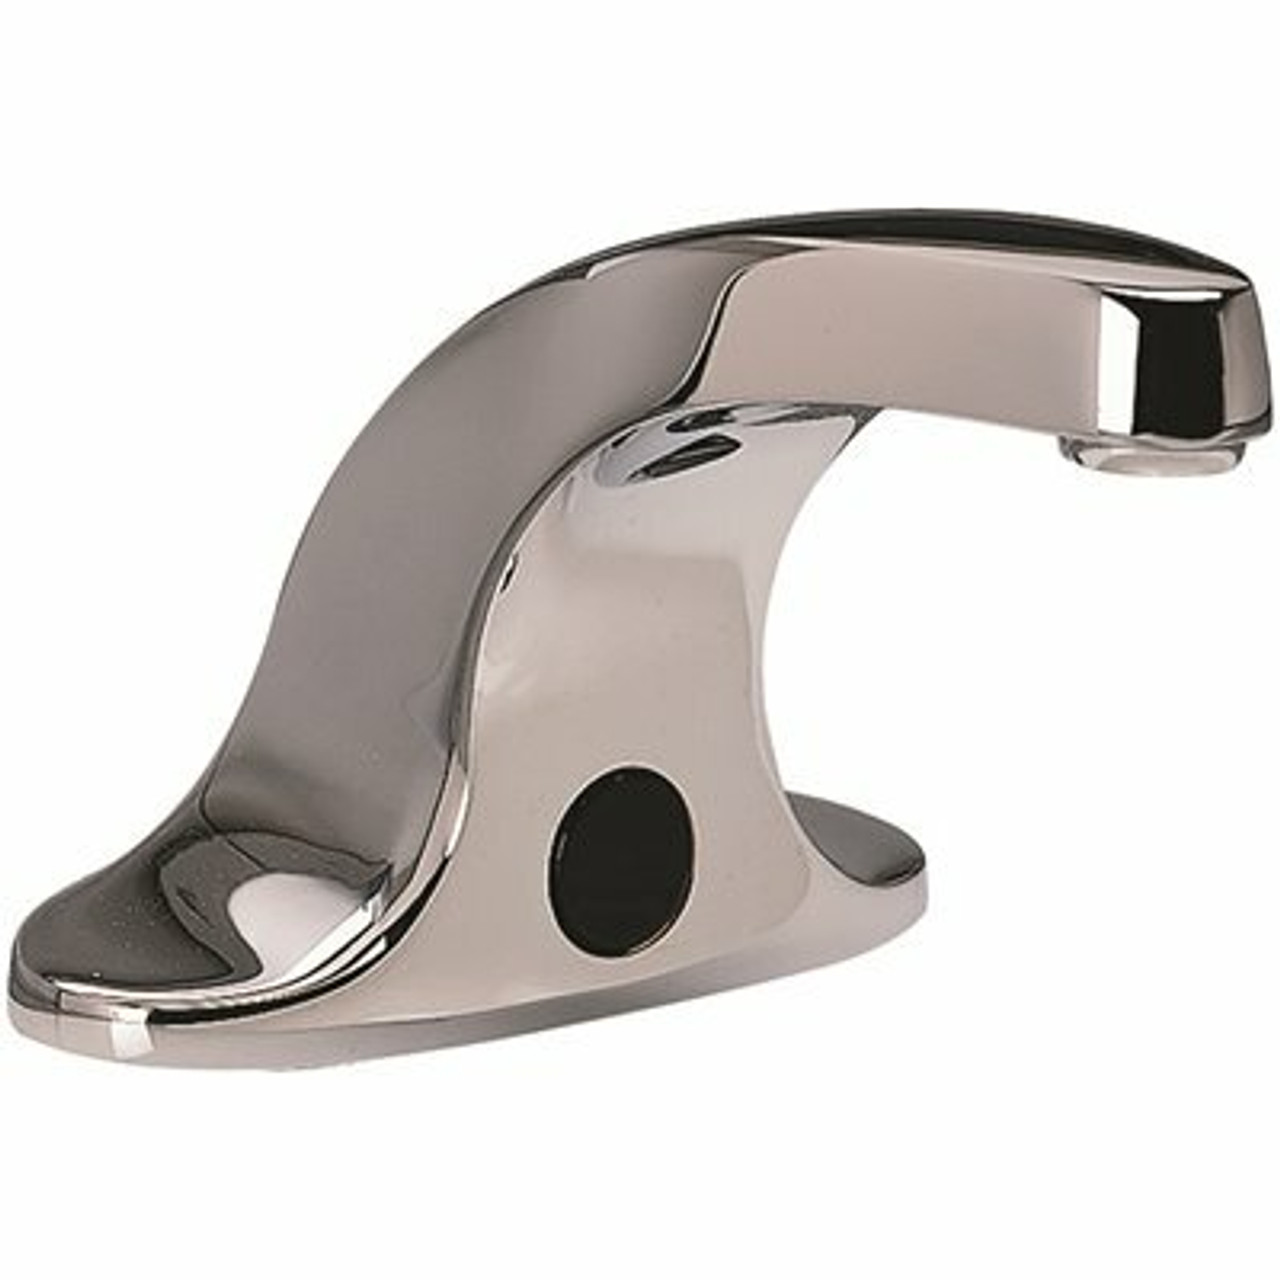 American Standard Innsbrook Selectronic 4 In. Centerset Proximity Bathroom Faucet Base Model 1.5 Gpm In Polished Chrome